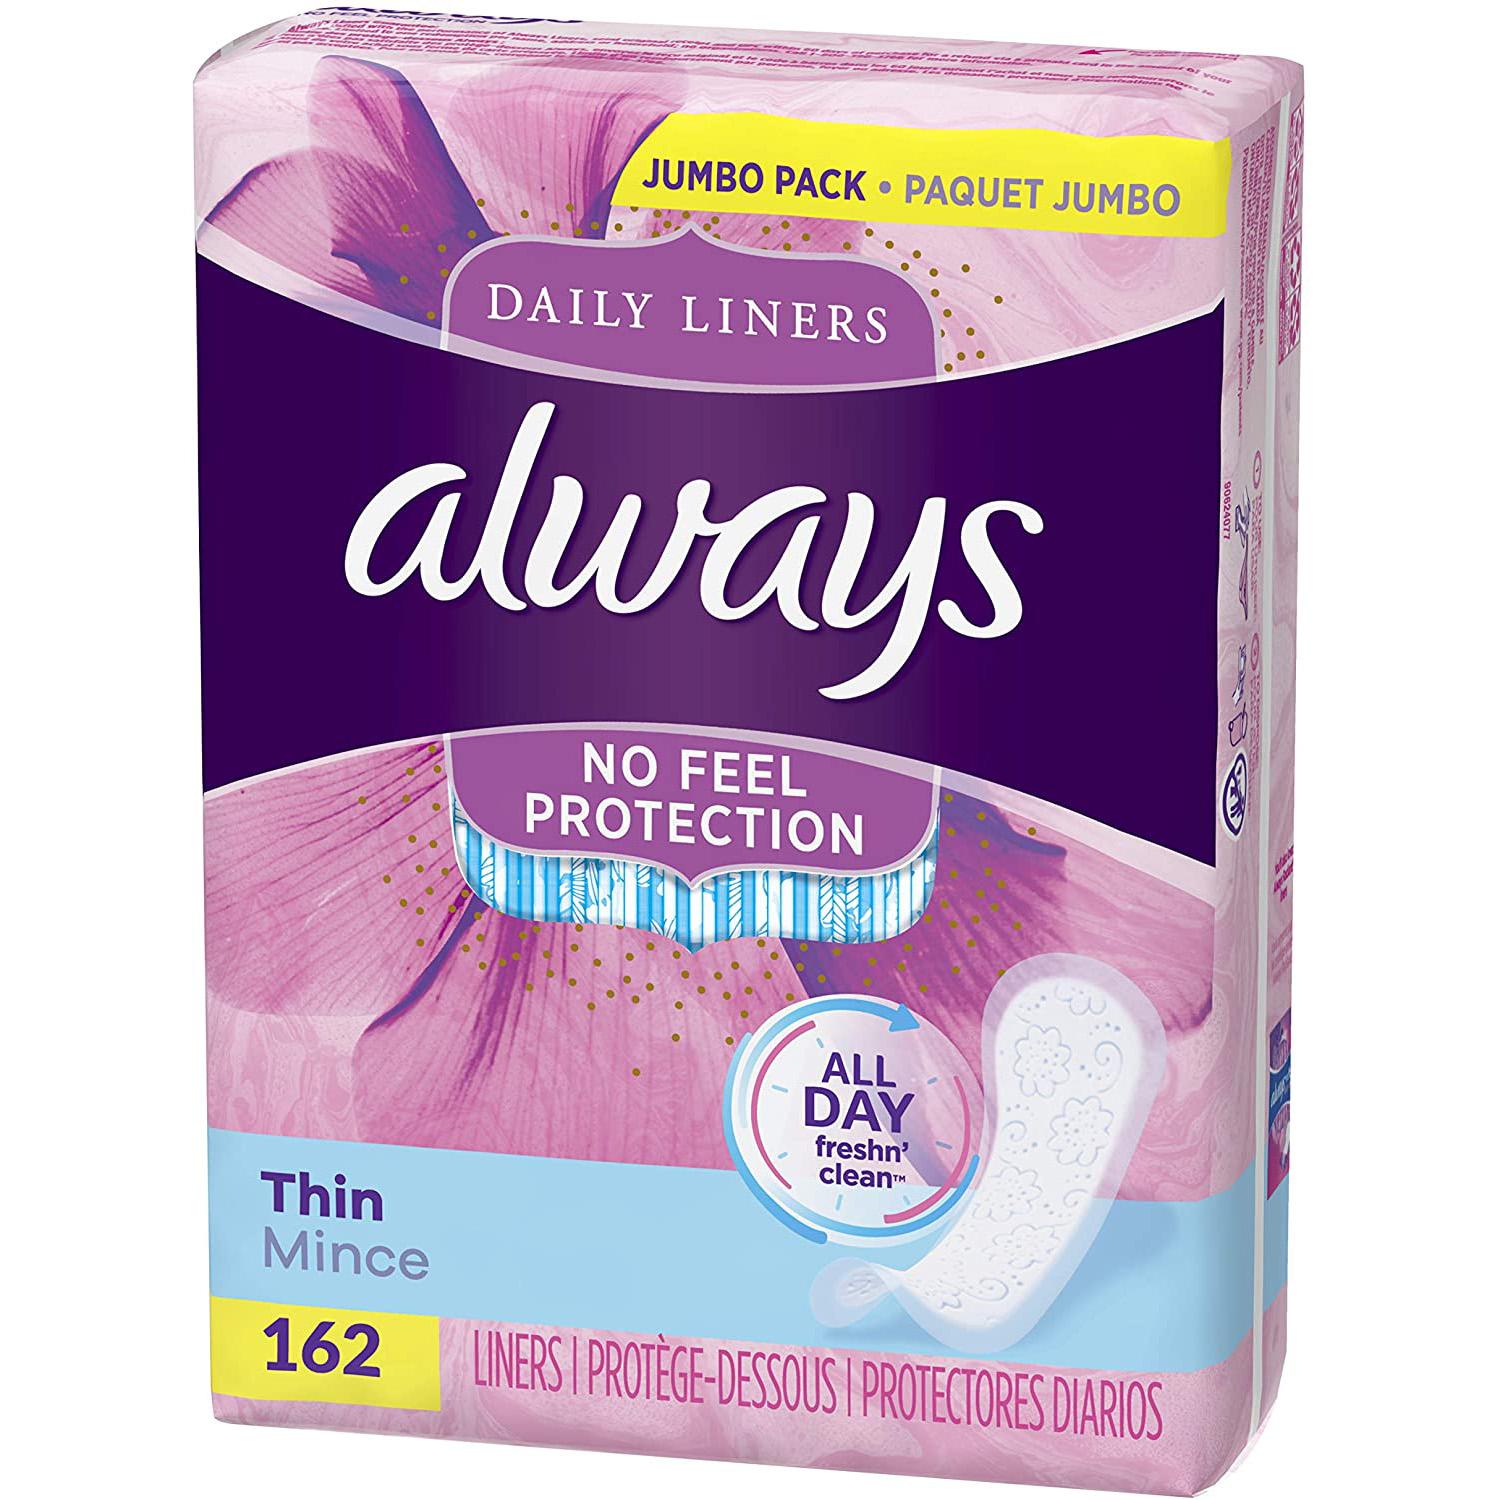 162 Always Thin Daily Liners for $5.09